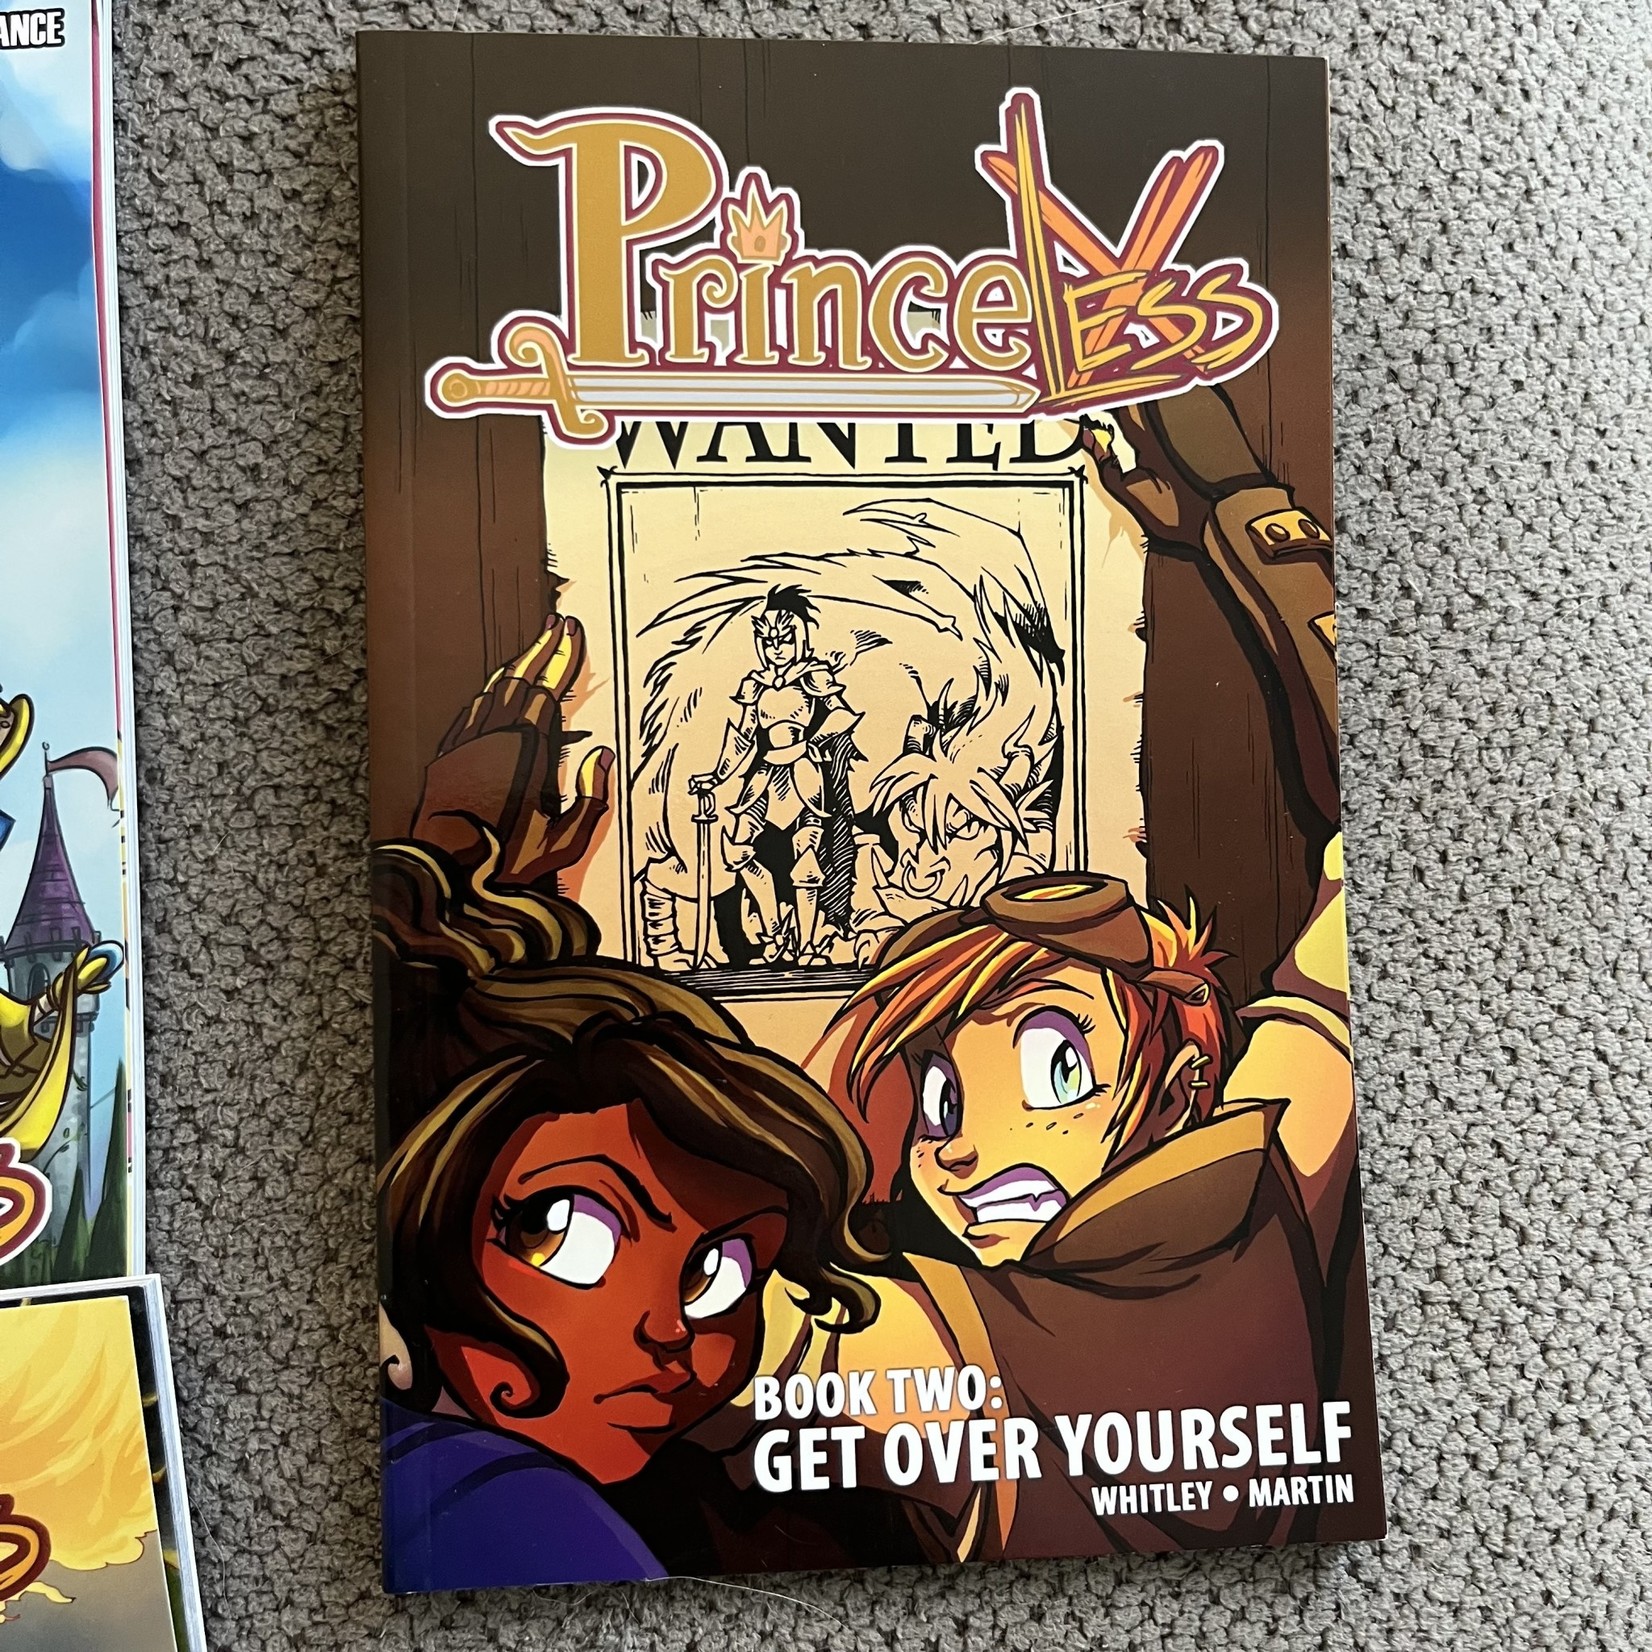 PrinceLess - Book Two: Get Over Yourself